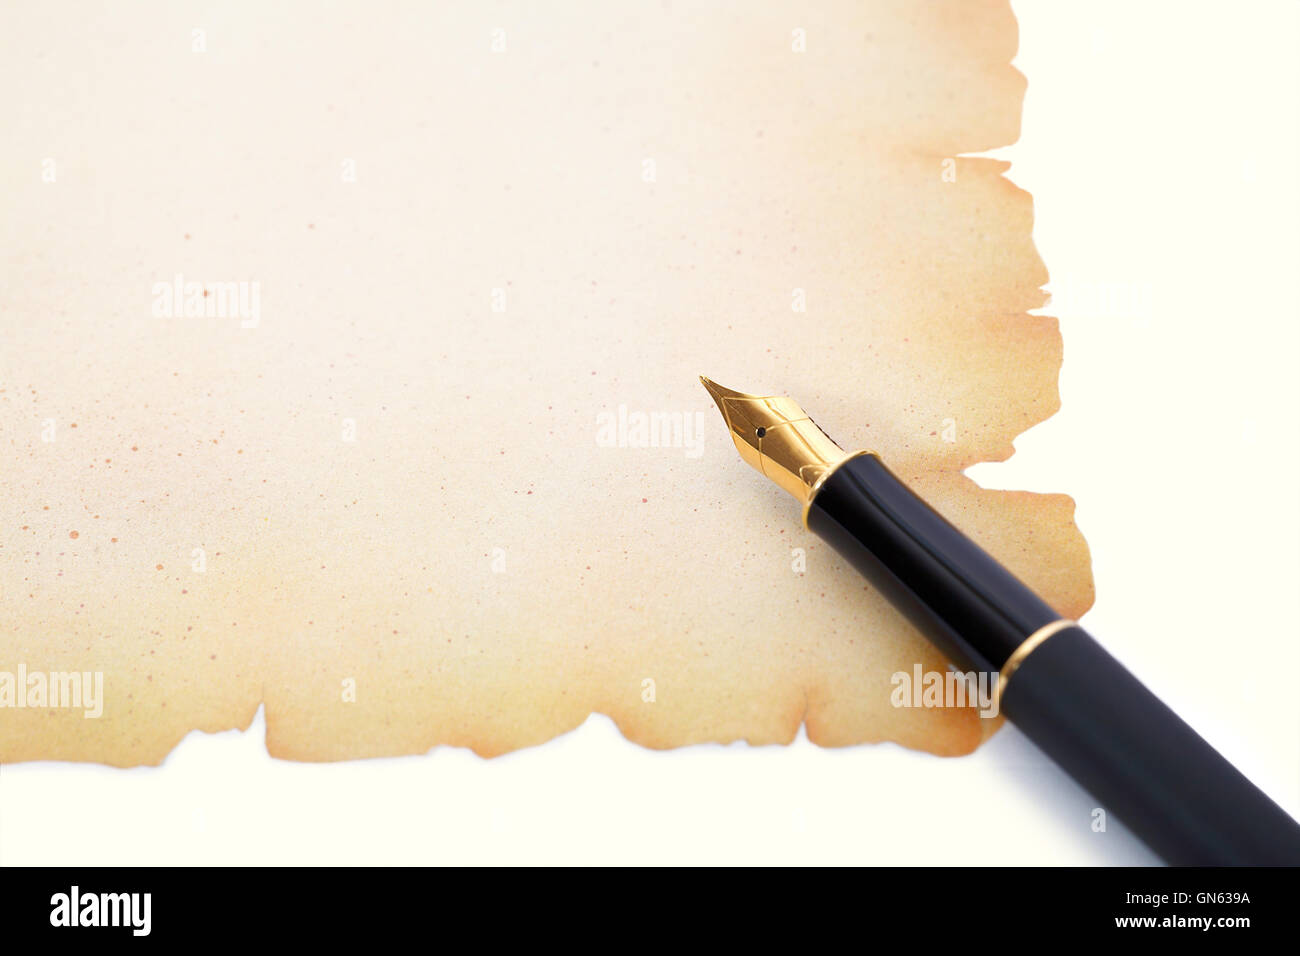 Fountain Pen On Decorative Paper With Ragged Edges Stock Photo Alamy